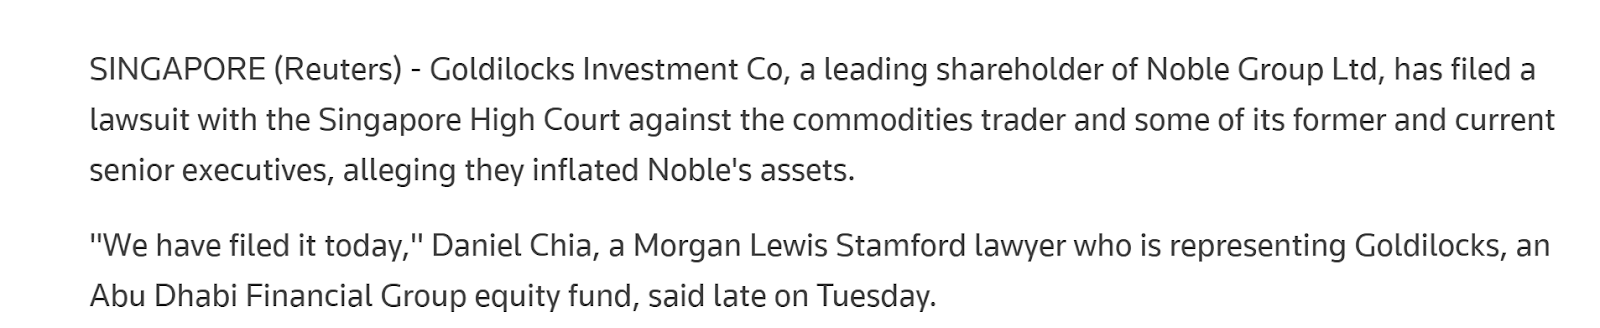 Noble Gold investments lawsuit